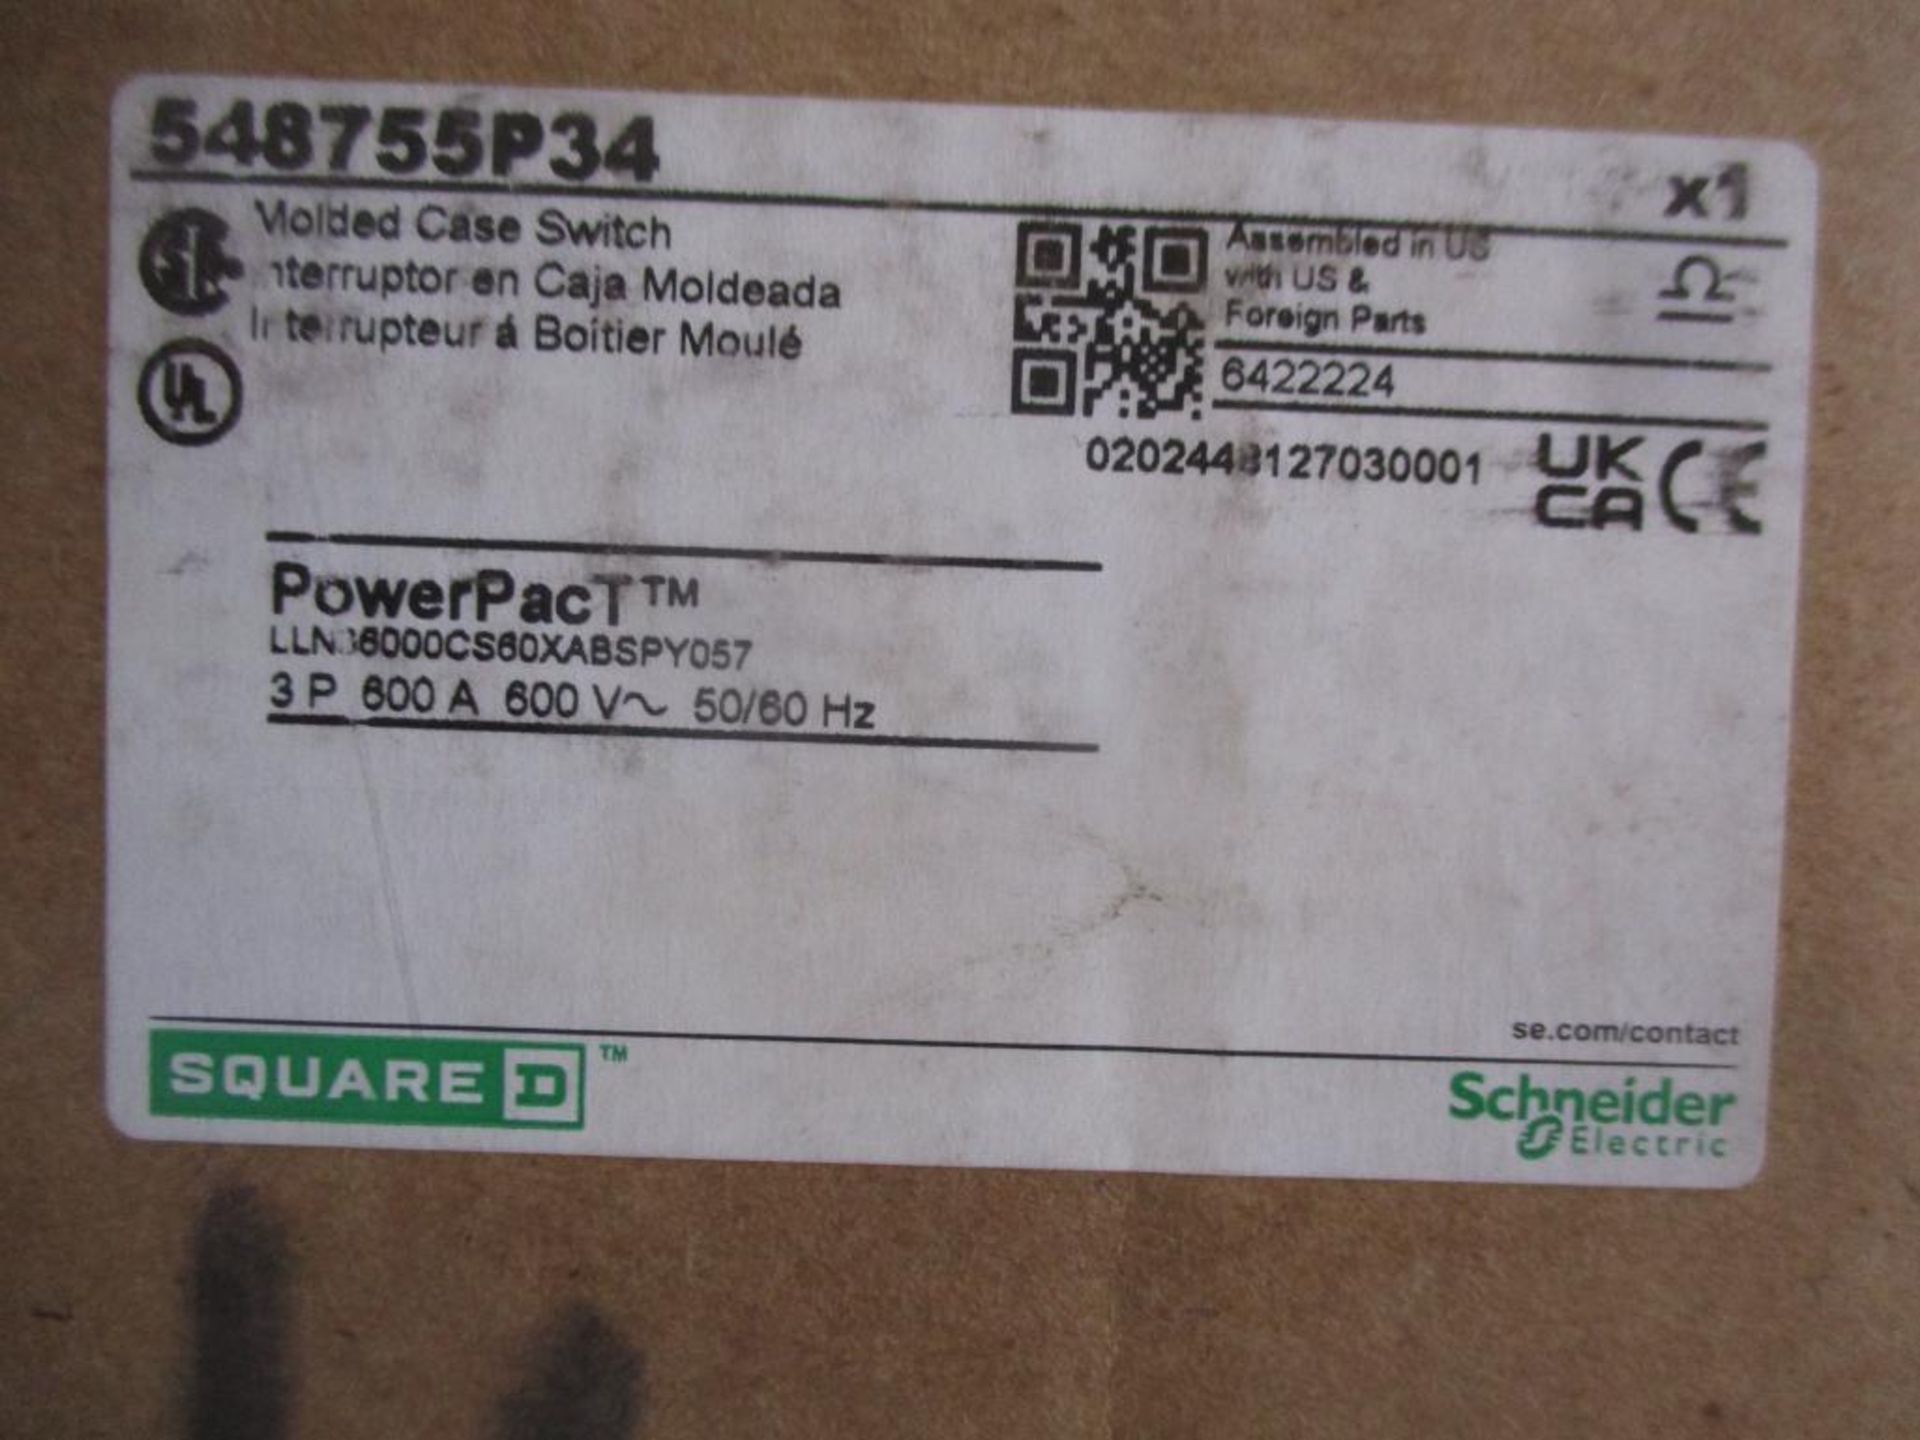 Square D 600 AMP Circuit Breaker, 548755P34, 600A, 3P, 600VAC, PowerPacT (New in Box) - Image 4 of 4